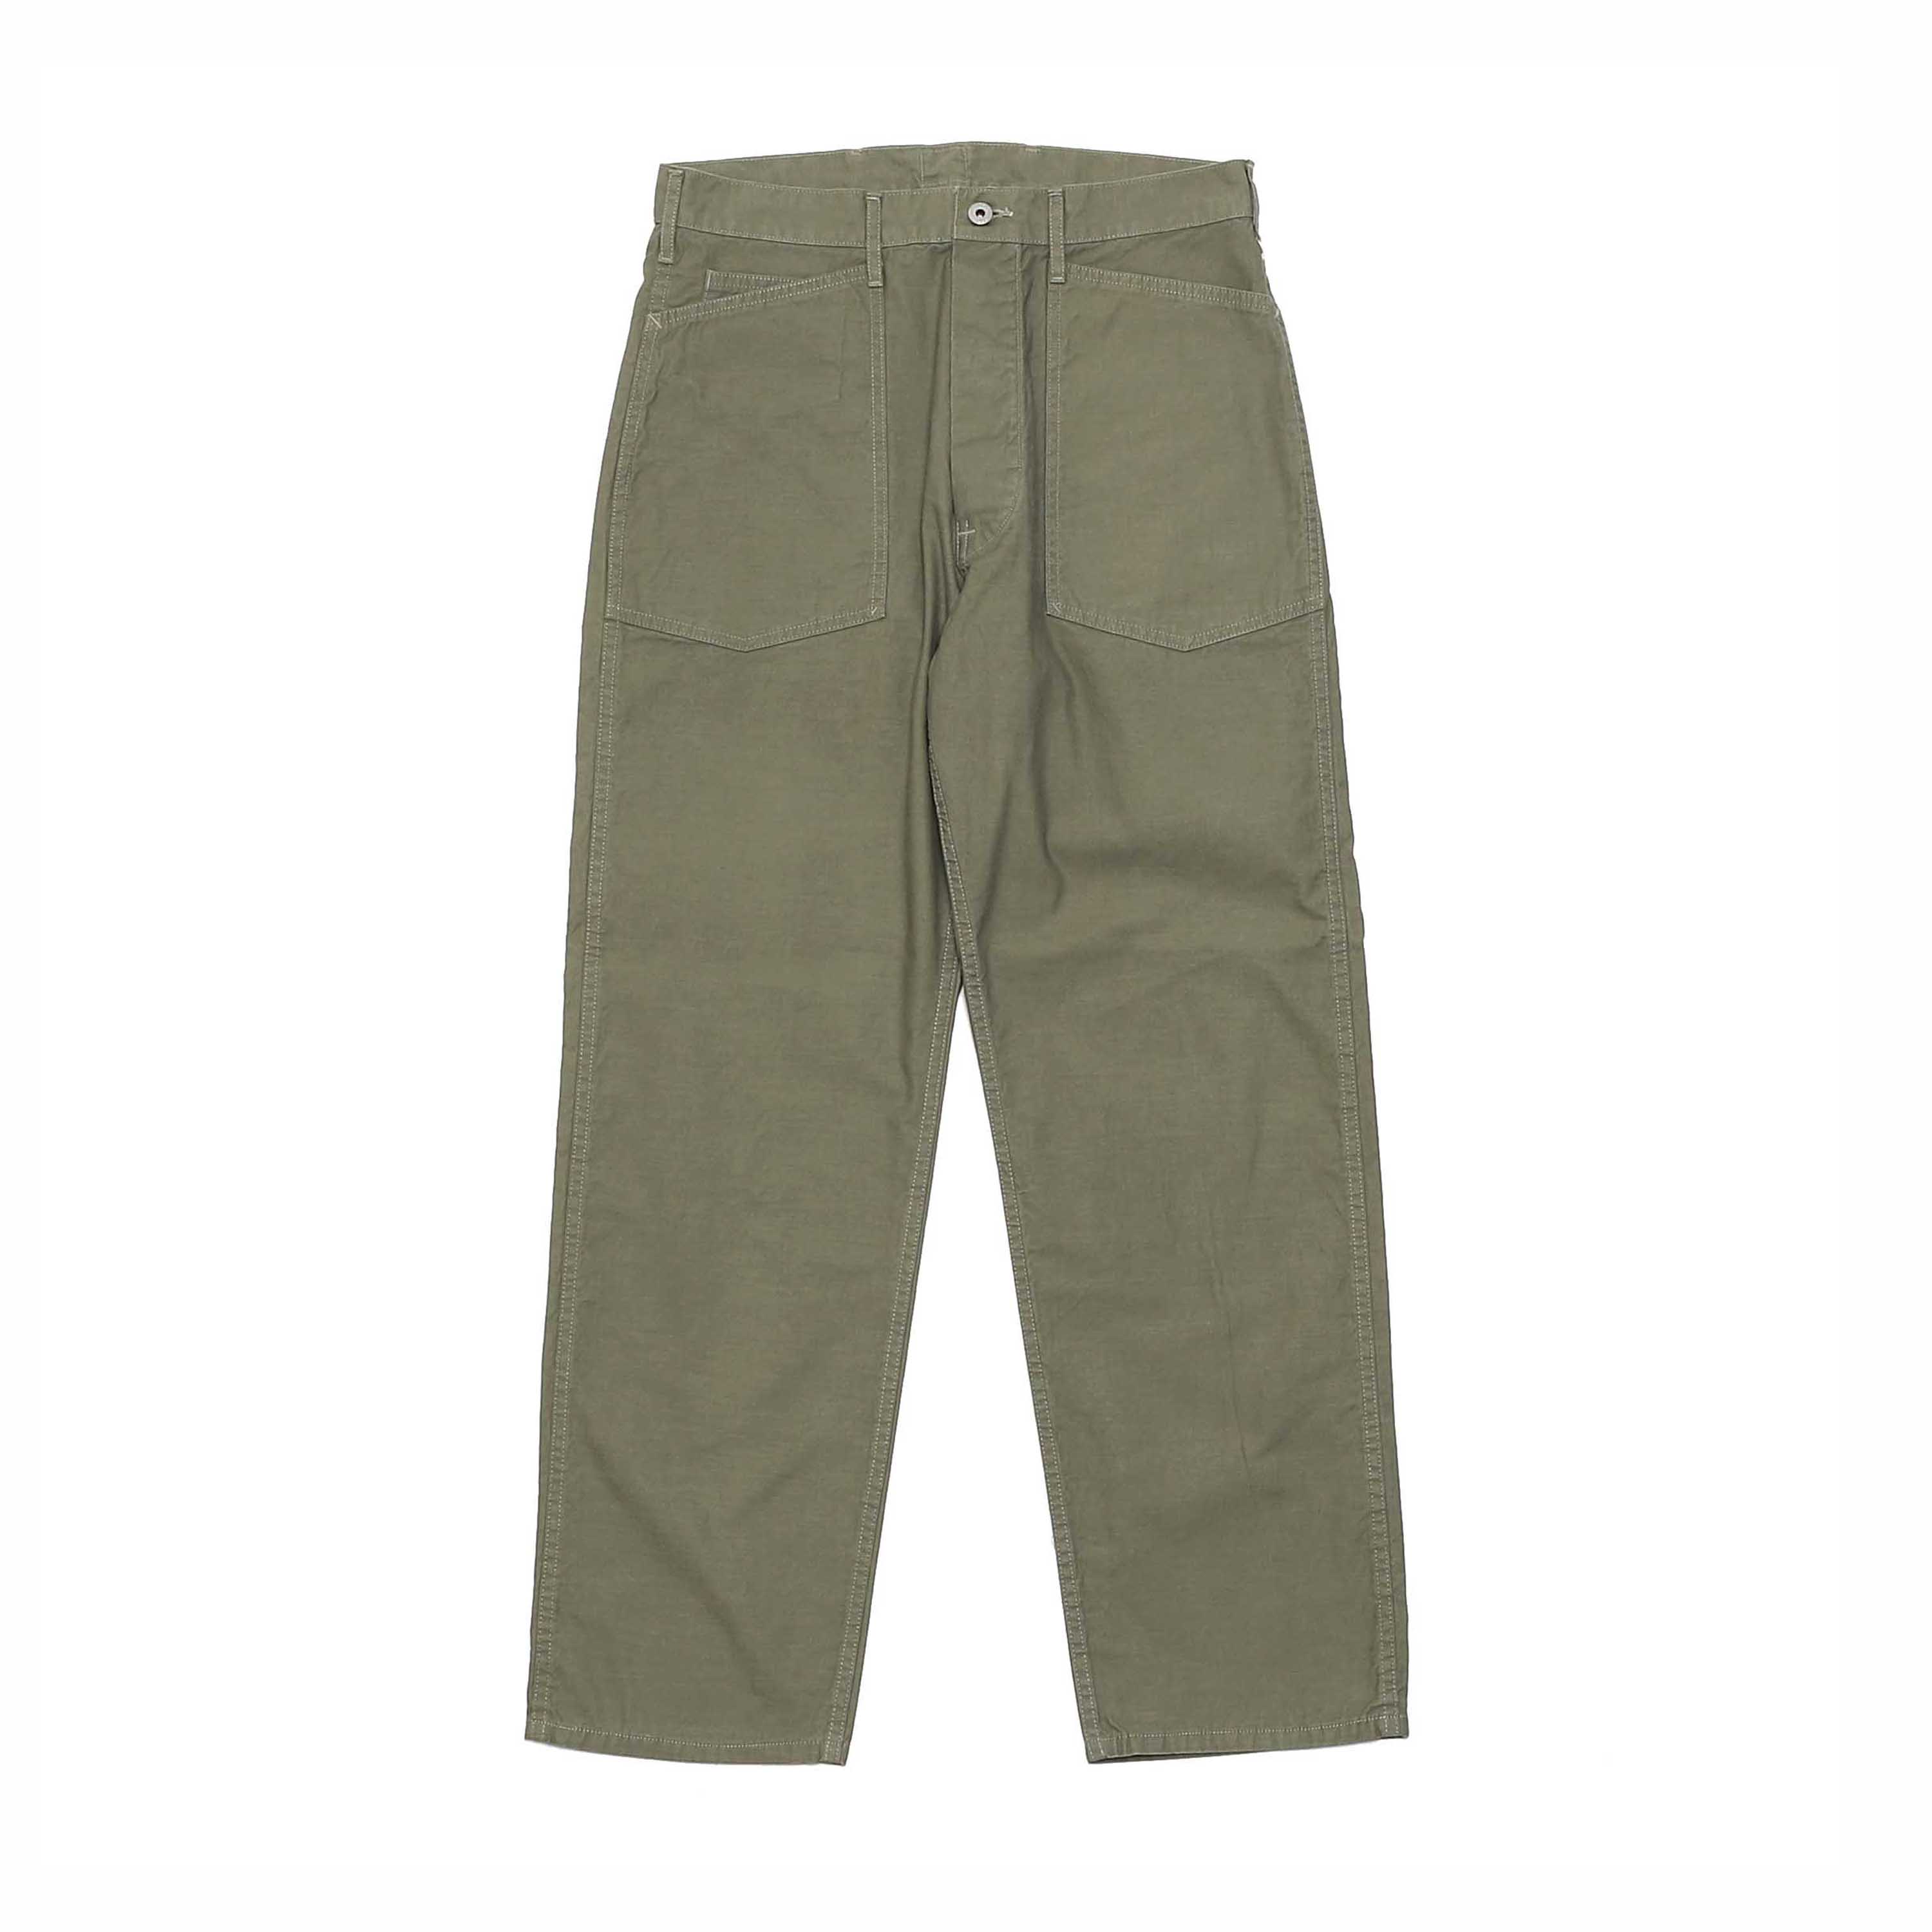 ARMY PANTS - OLIVE